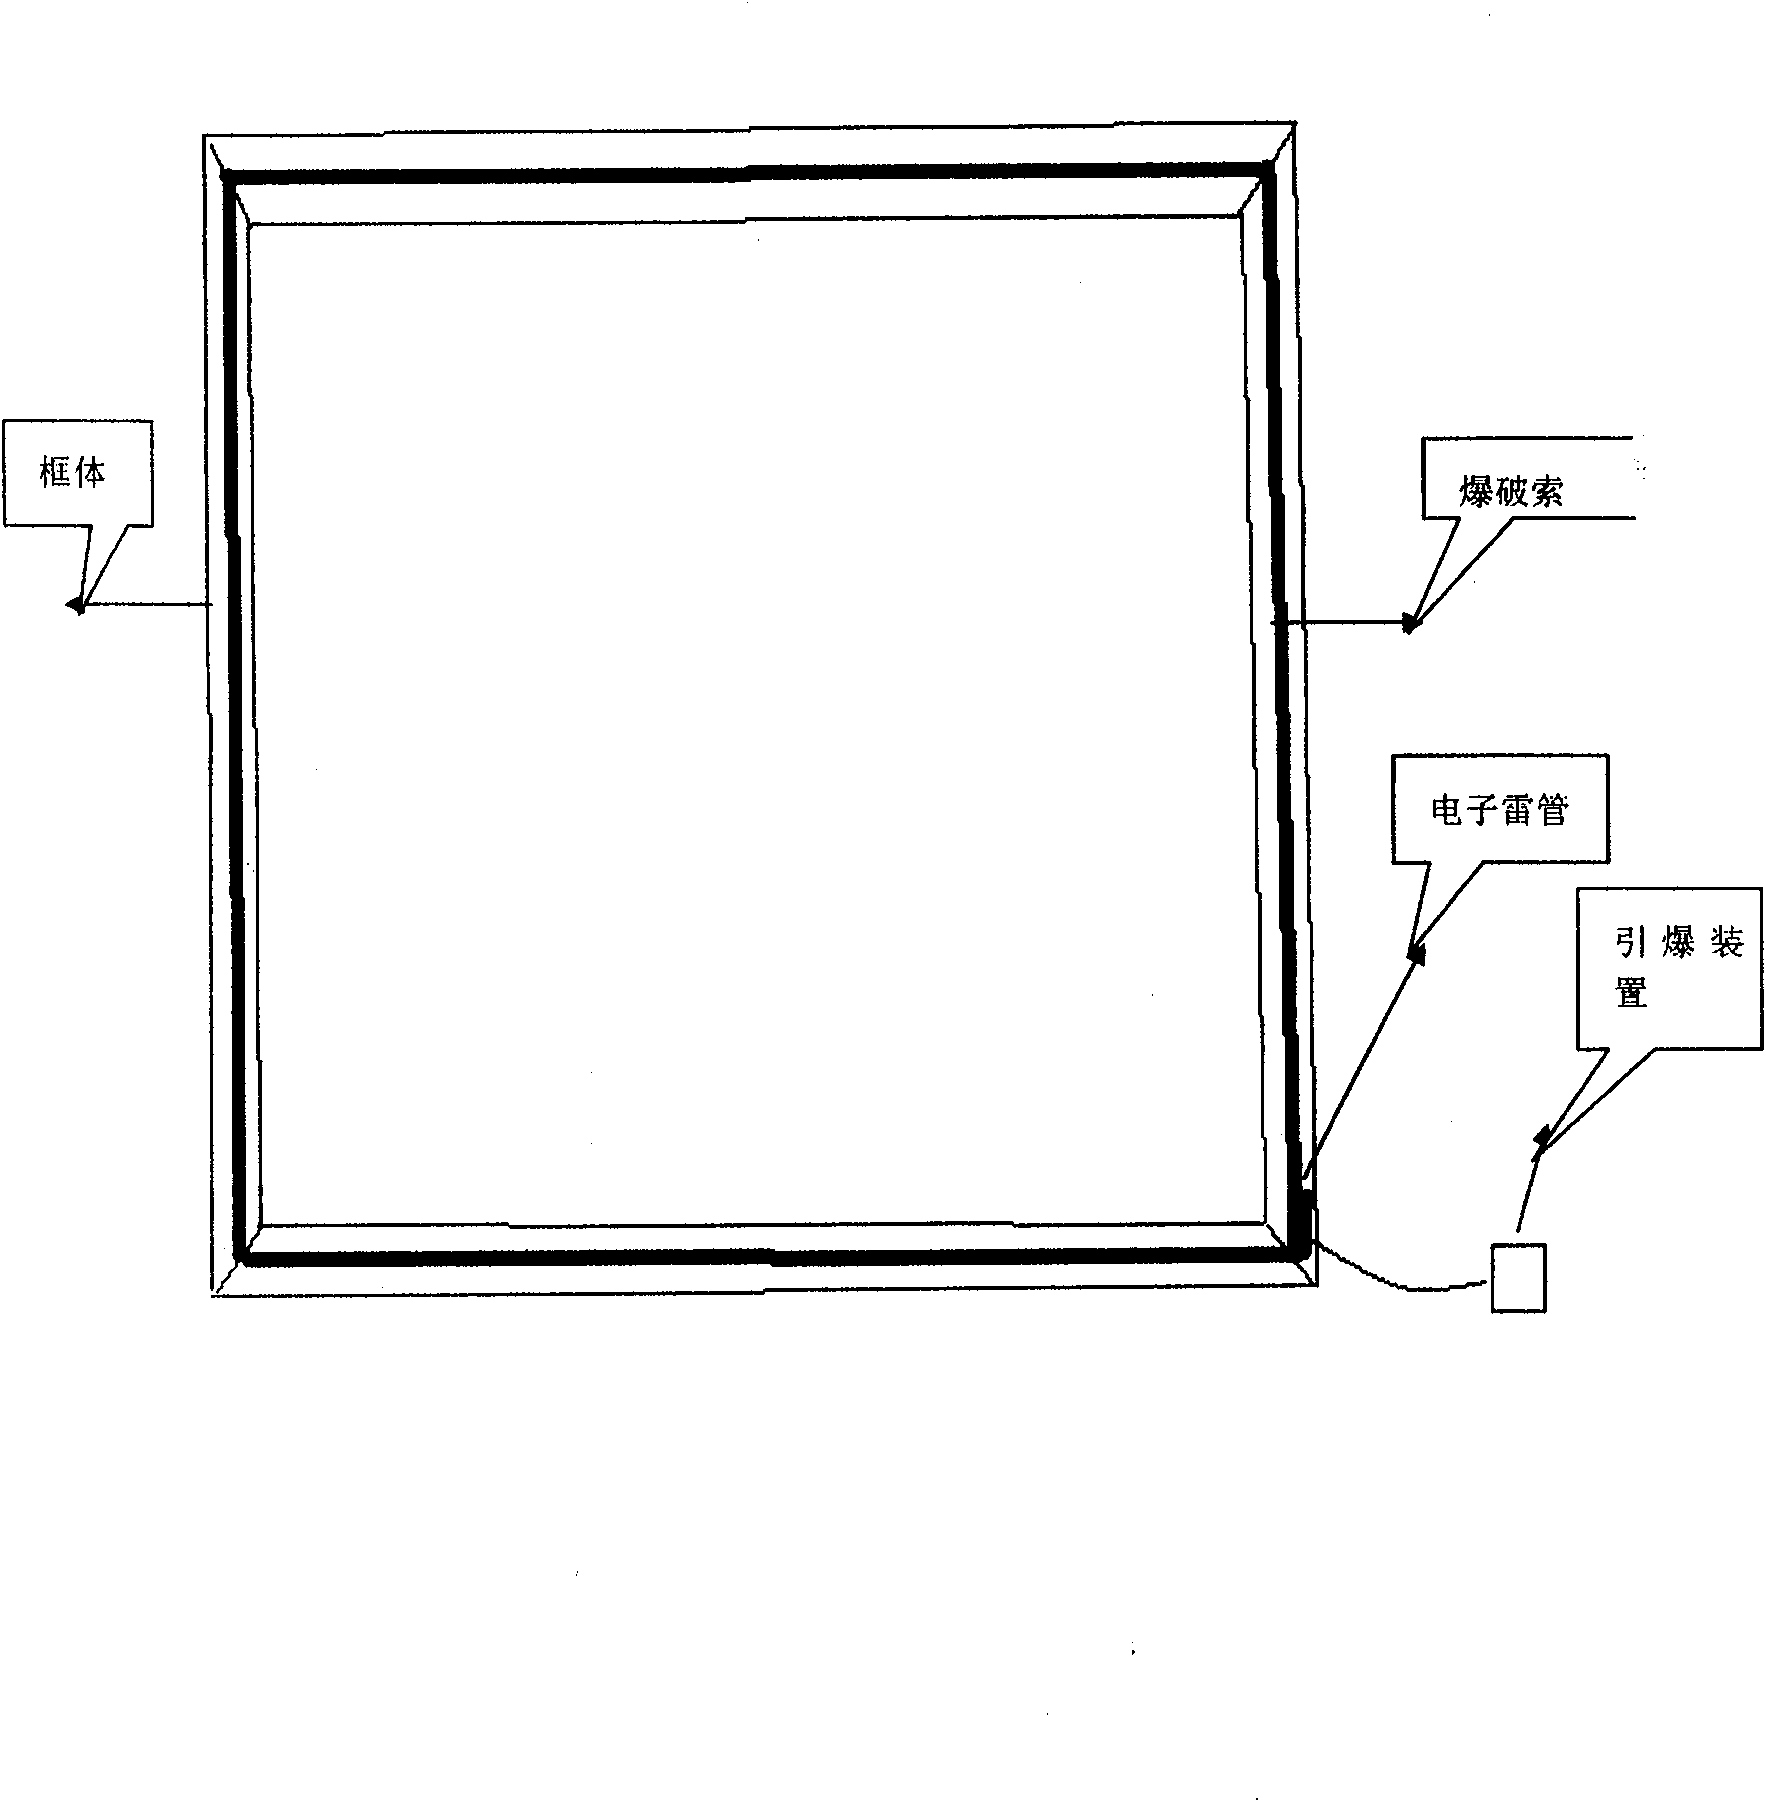 Door and window frame with explosion device